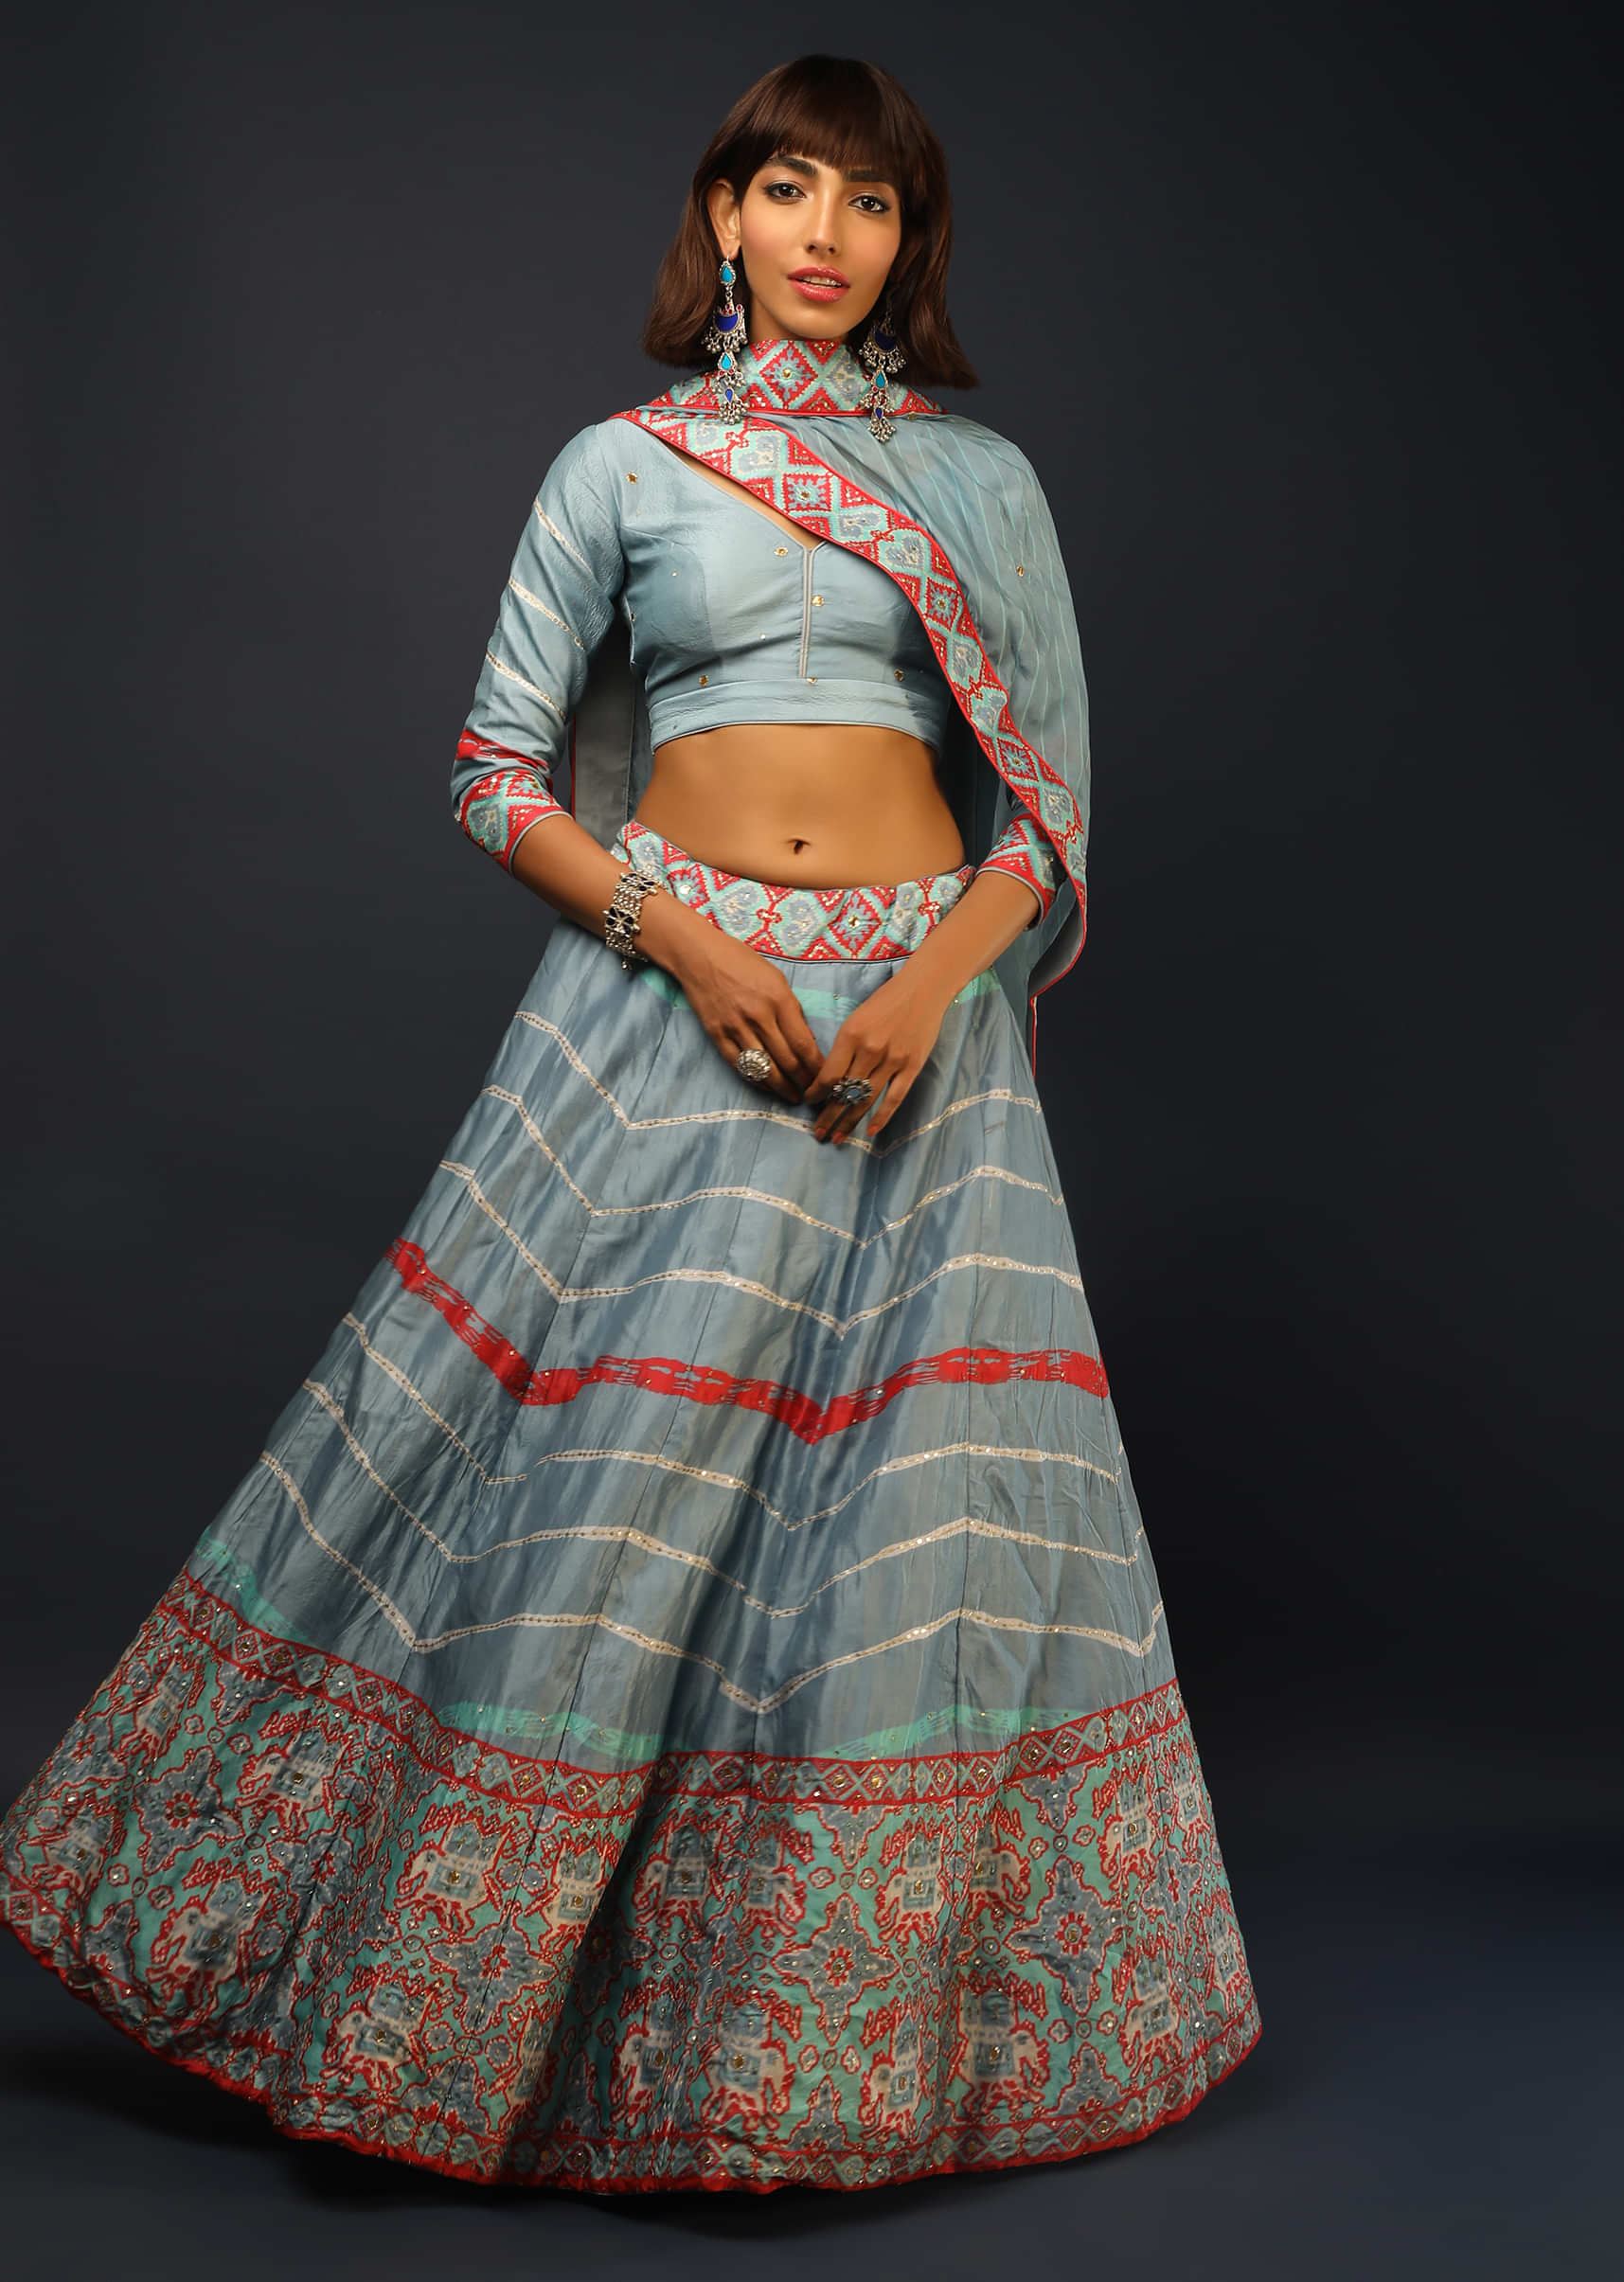 Blue Bell Lehenga In Silk With Tie Dye Printed Stripes And Multicolored Patola Border 